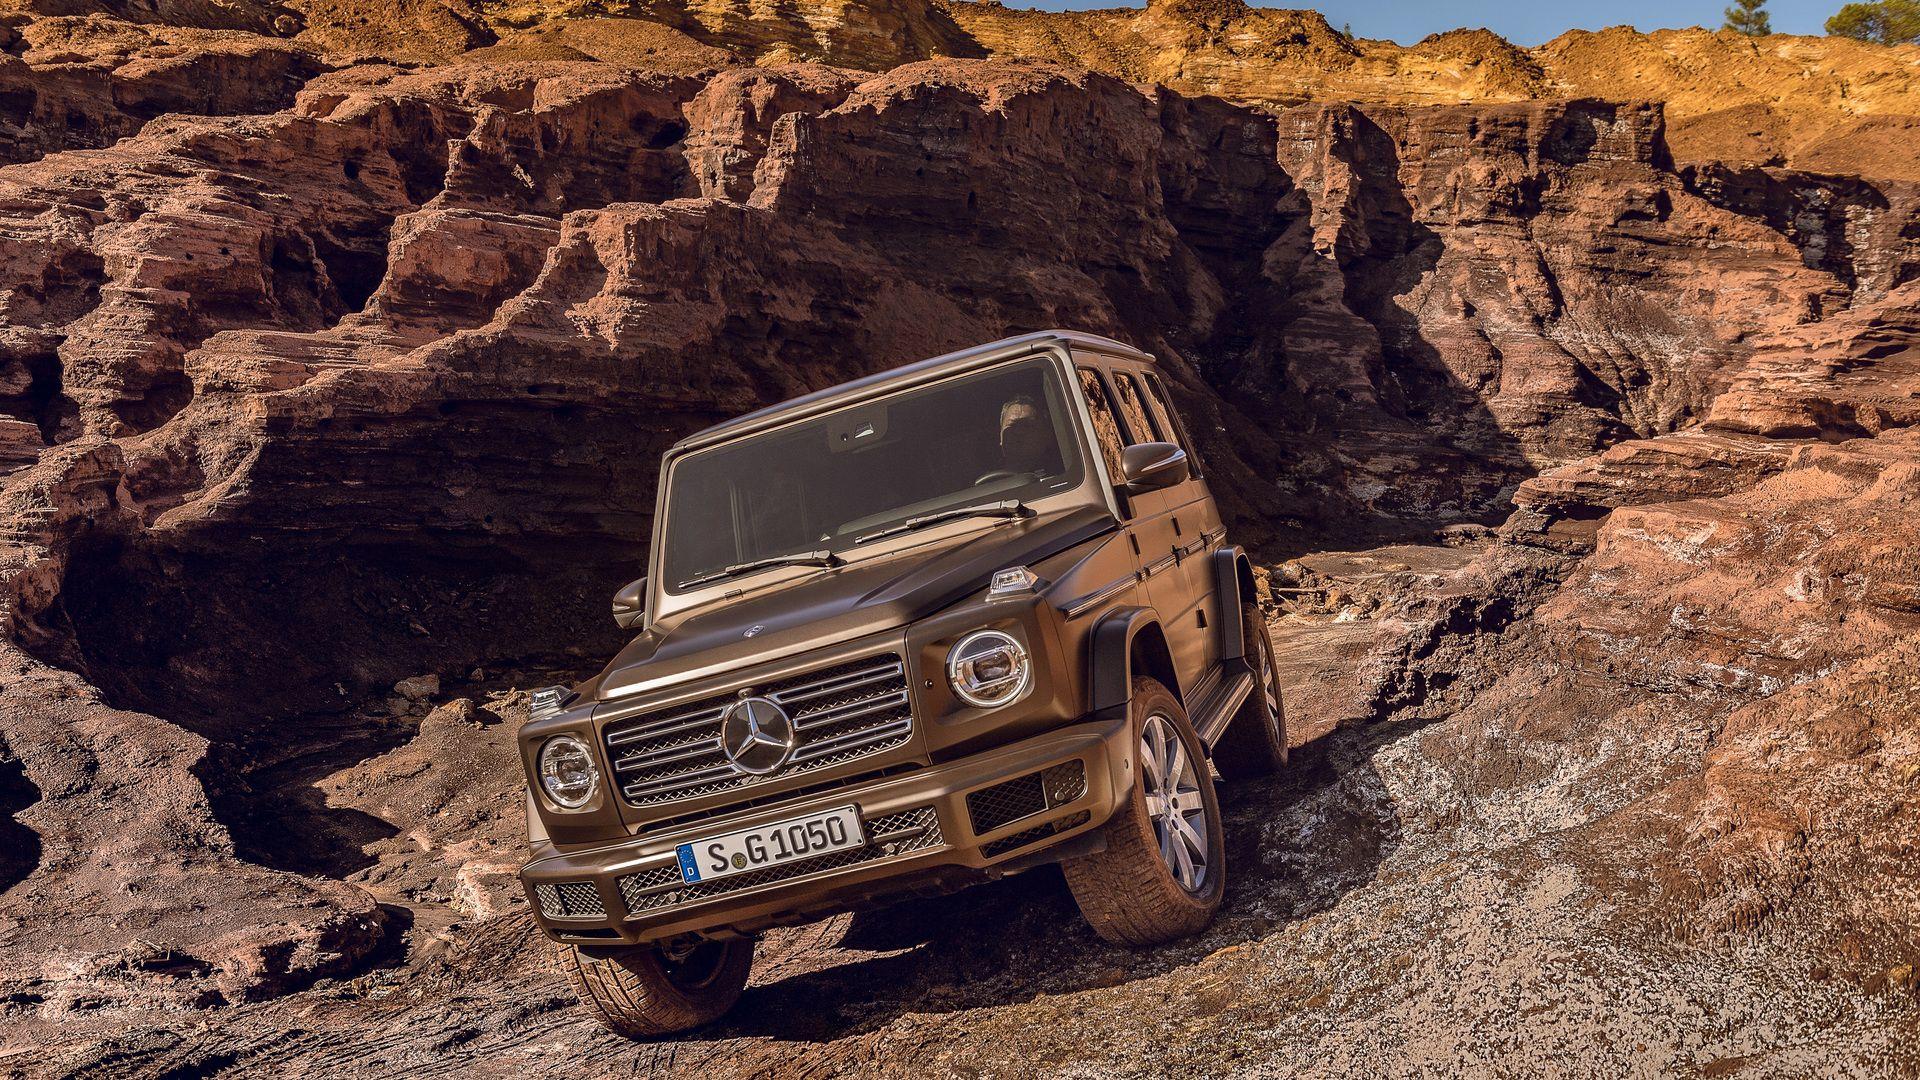 G-Wagon Wallpapers - Wallpaper Cave